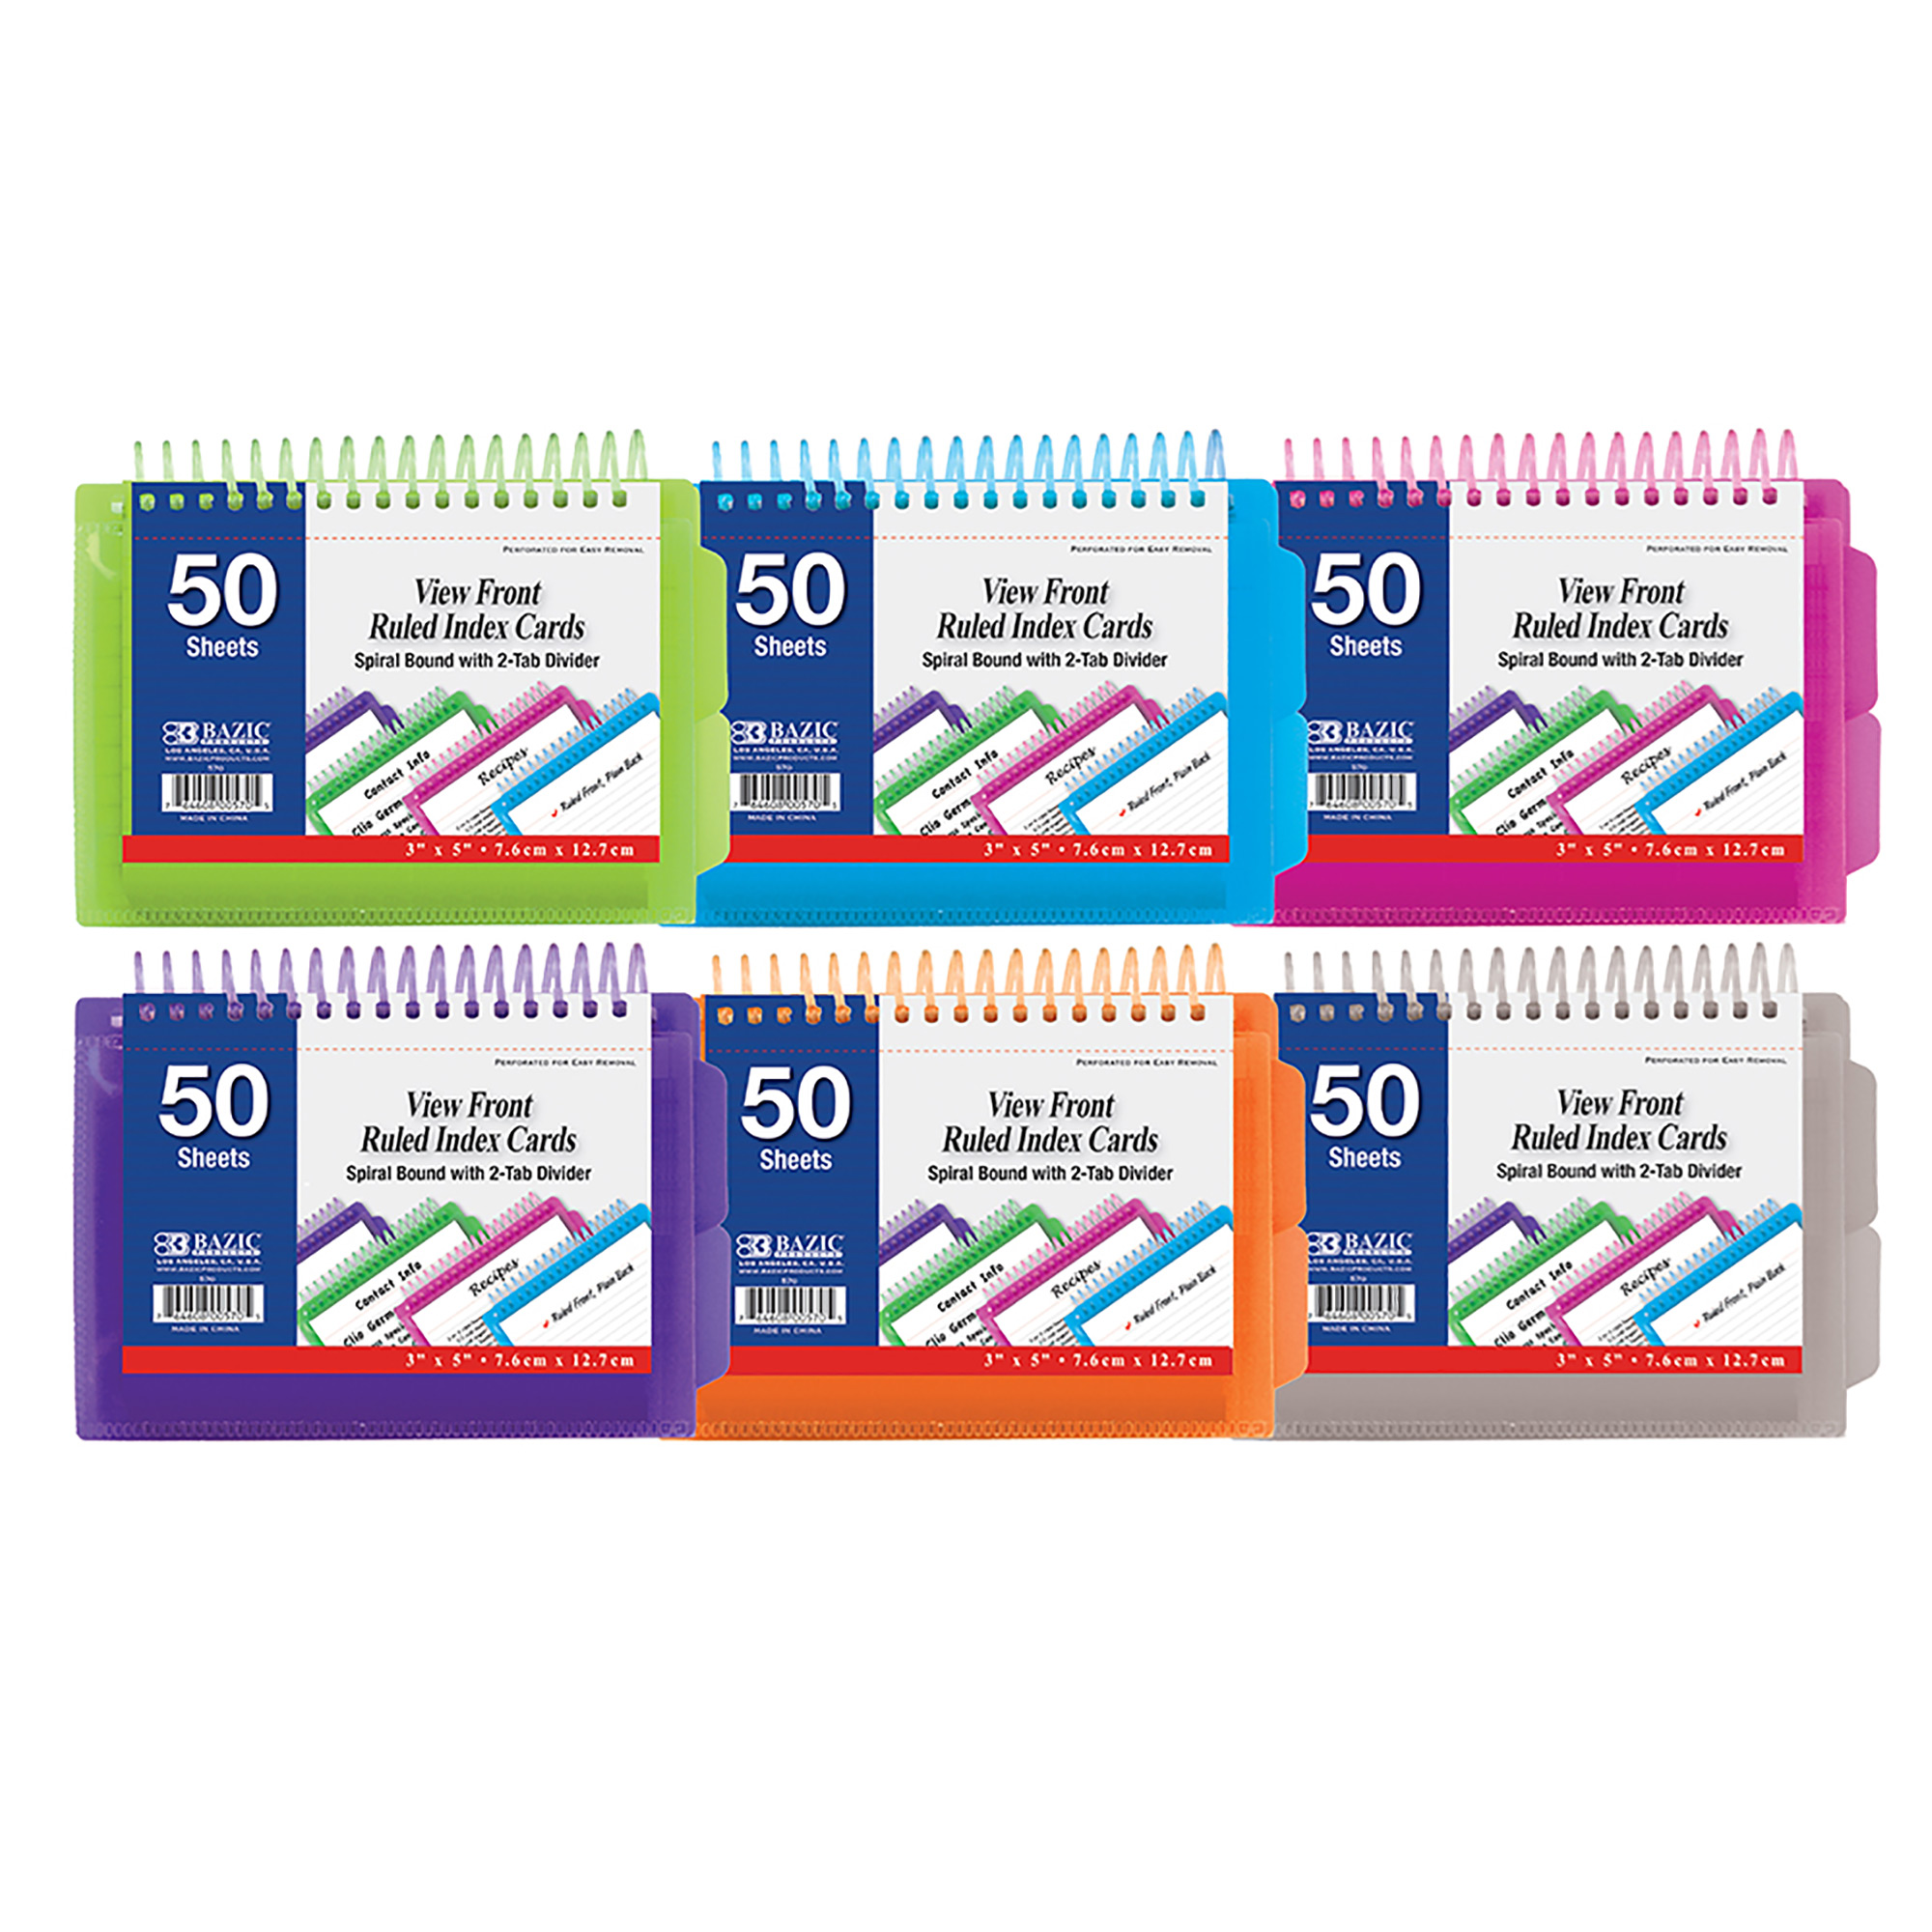 BAZIC 50 Ct. 5 X 8 Ruled White Index Card Bazic Products